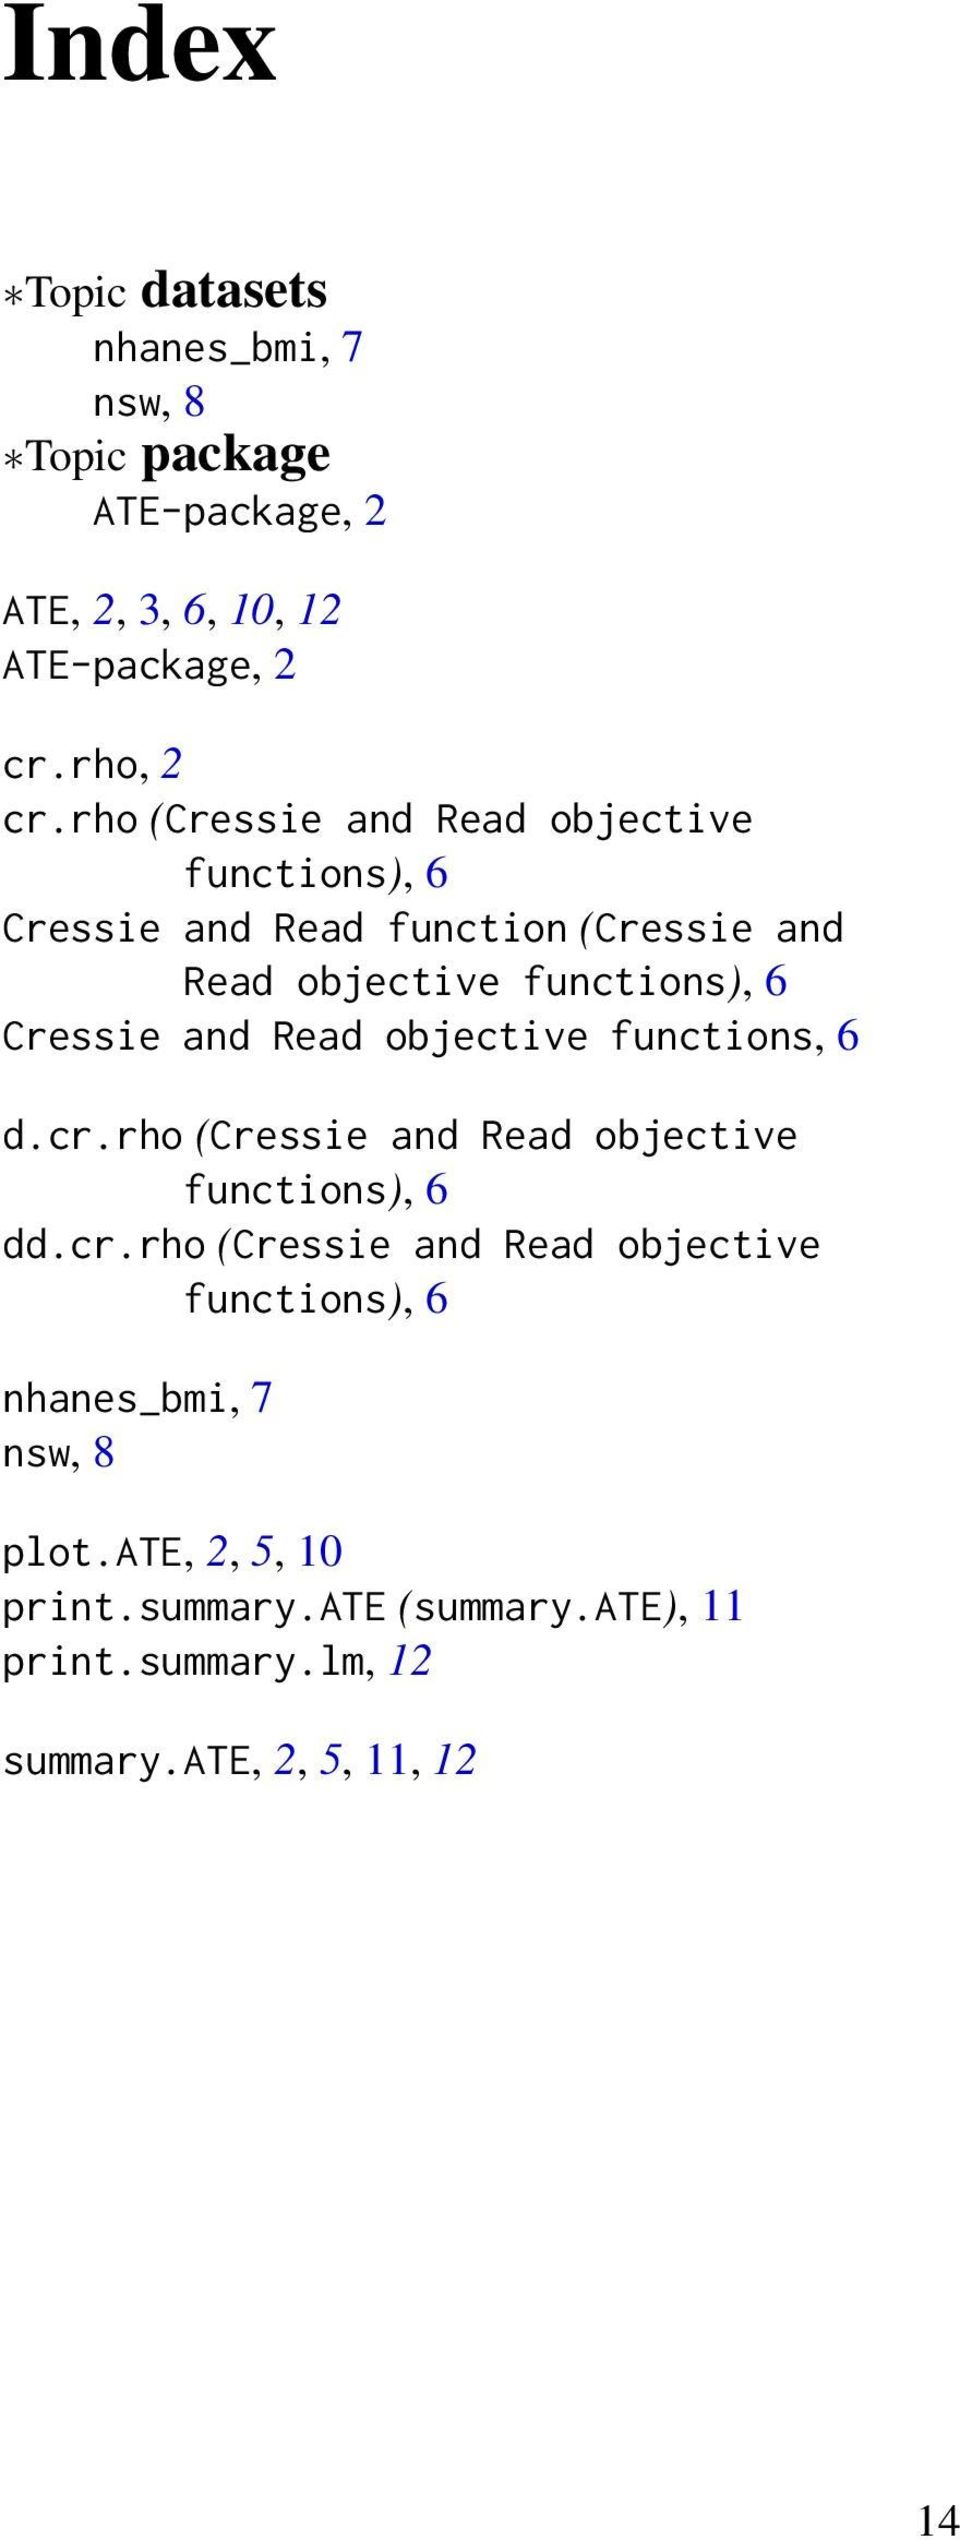 Read objective functions, 6 d.cr.rho (Cressie and Read objective functions), 6 dd.cr.rho (Cressie and Read objective functions), 6 nhanes_bmi, 7 nsw, 8 plot.